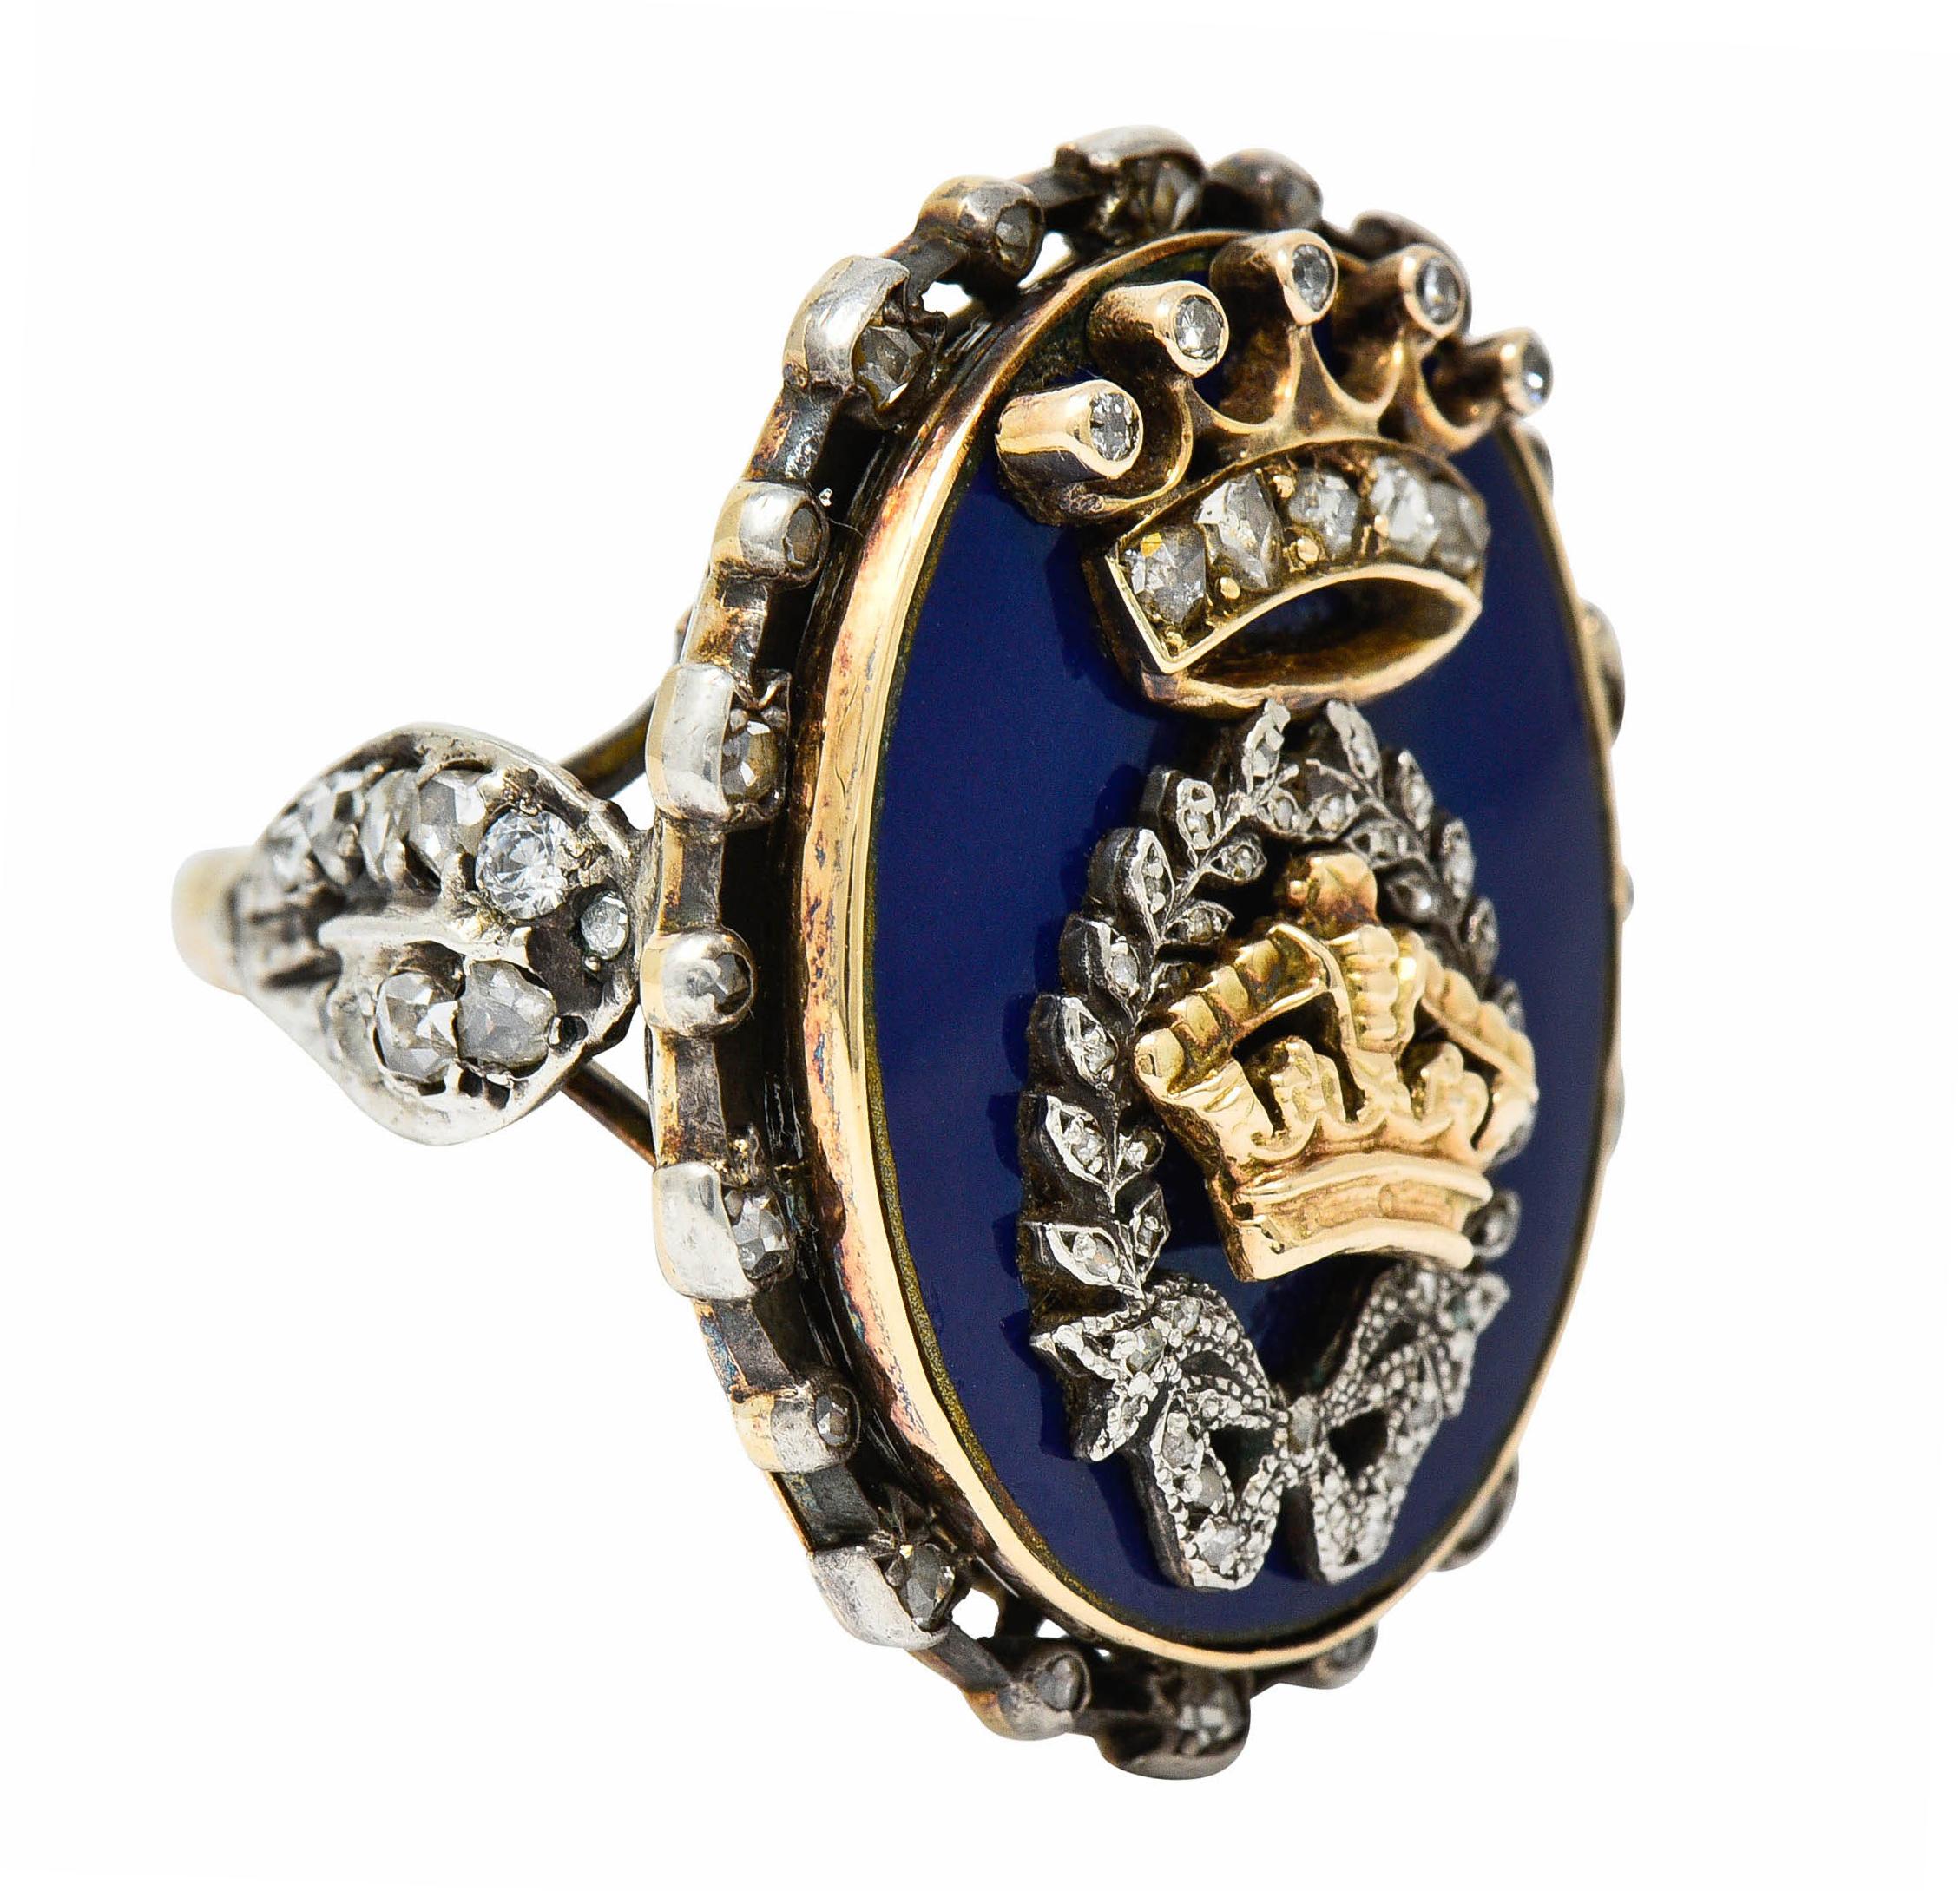 Oval statement ring depicts two gold crowns with a silver laurel motif

Surrounded by ultramarine blue enamel - exhibiting no loss

With a rose cut diamond halo and cathedral shoulders

Tested as silver-topped 18 karat gold

Circa: 1870

Ring Size: